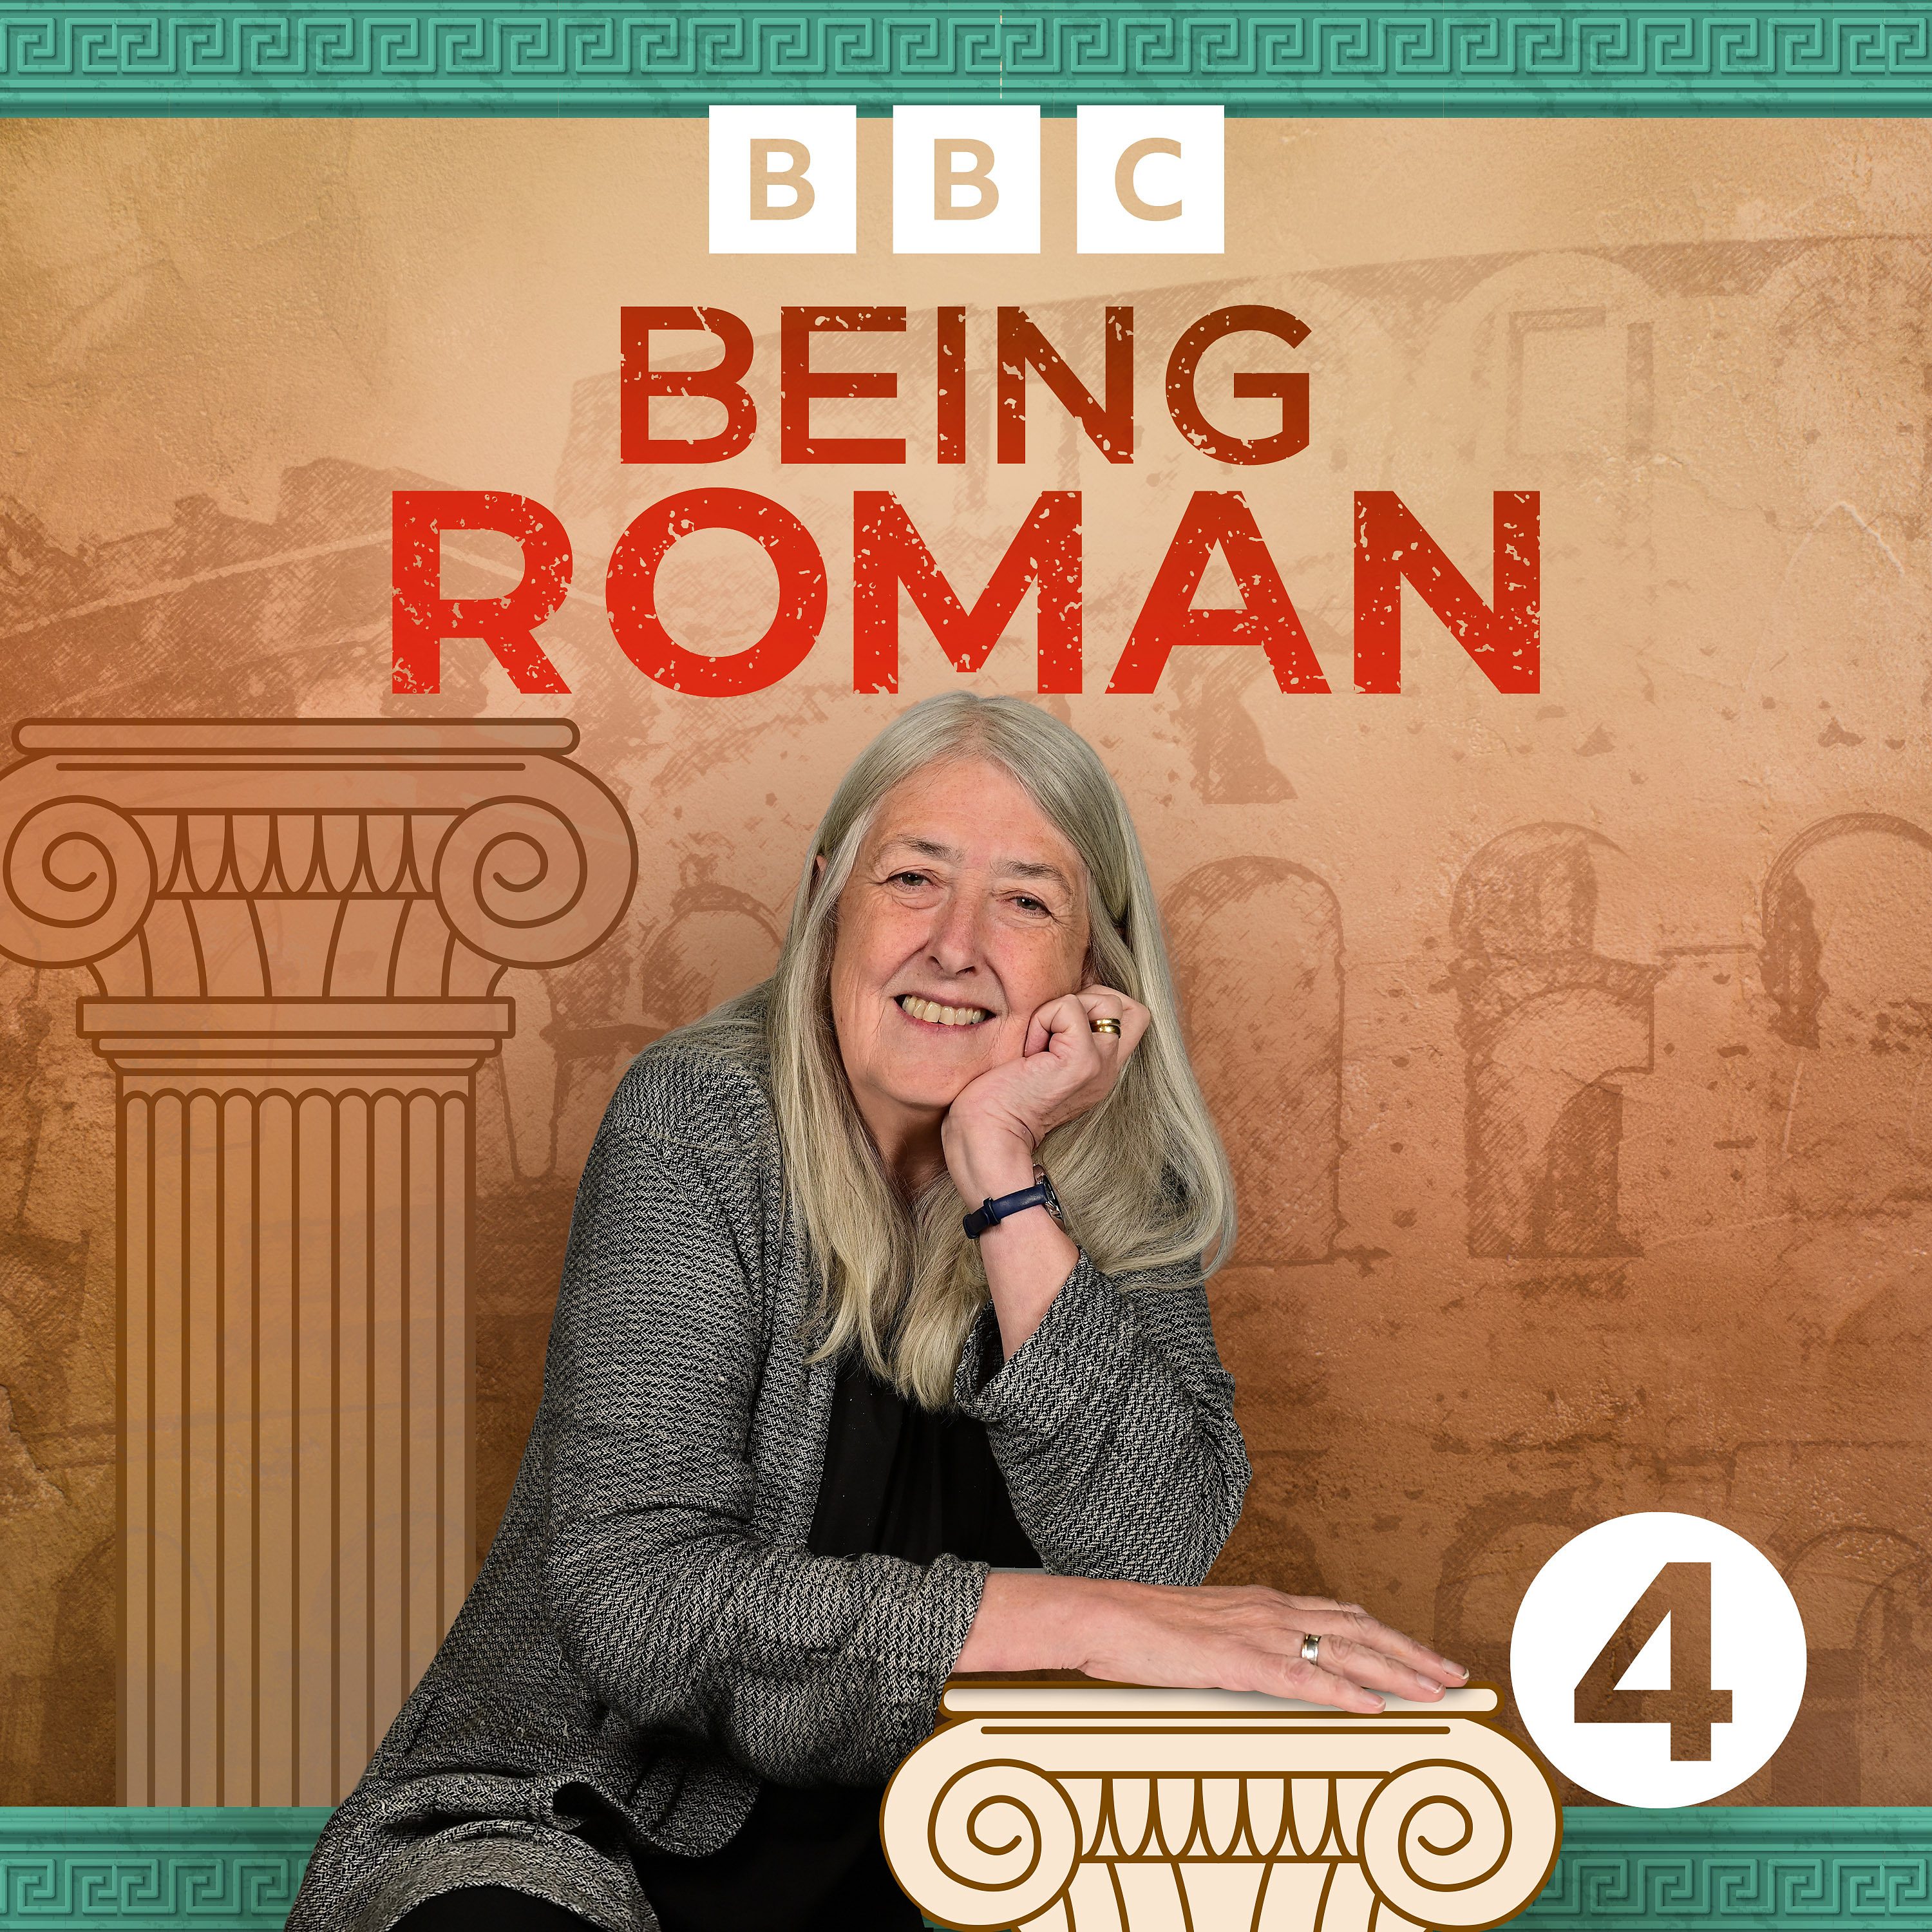 Welcome to Being Roman with Mary Beard